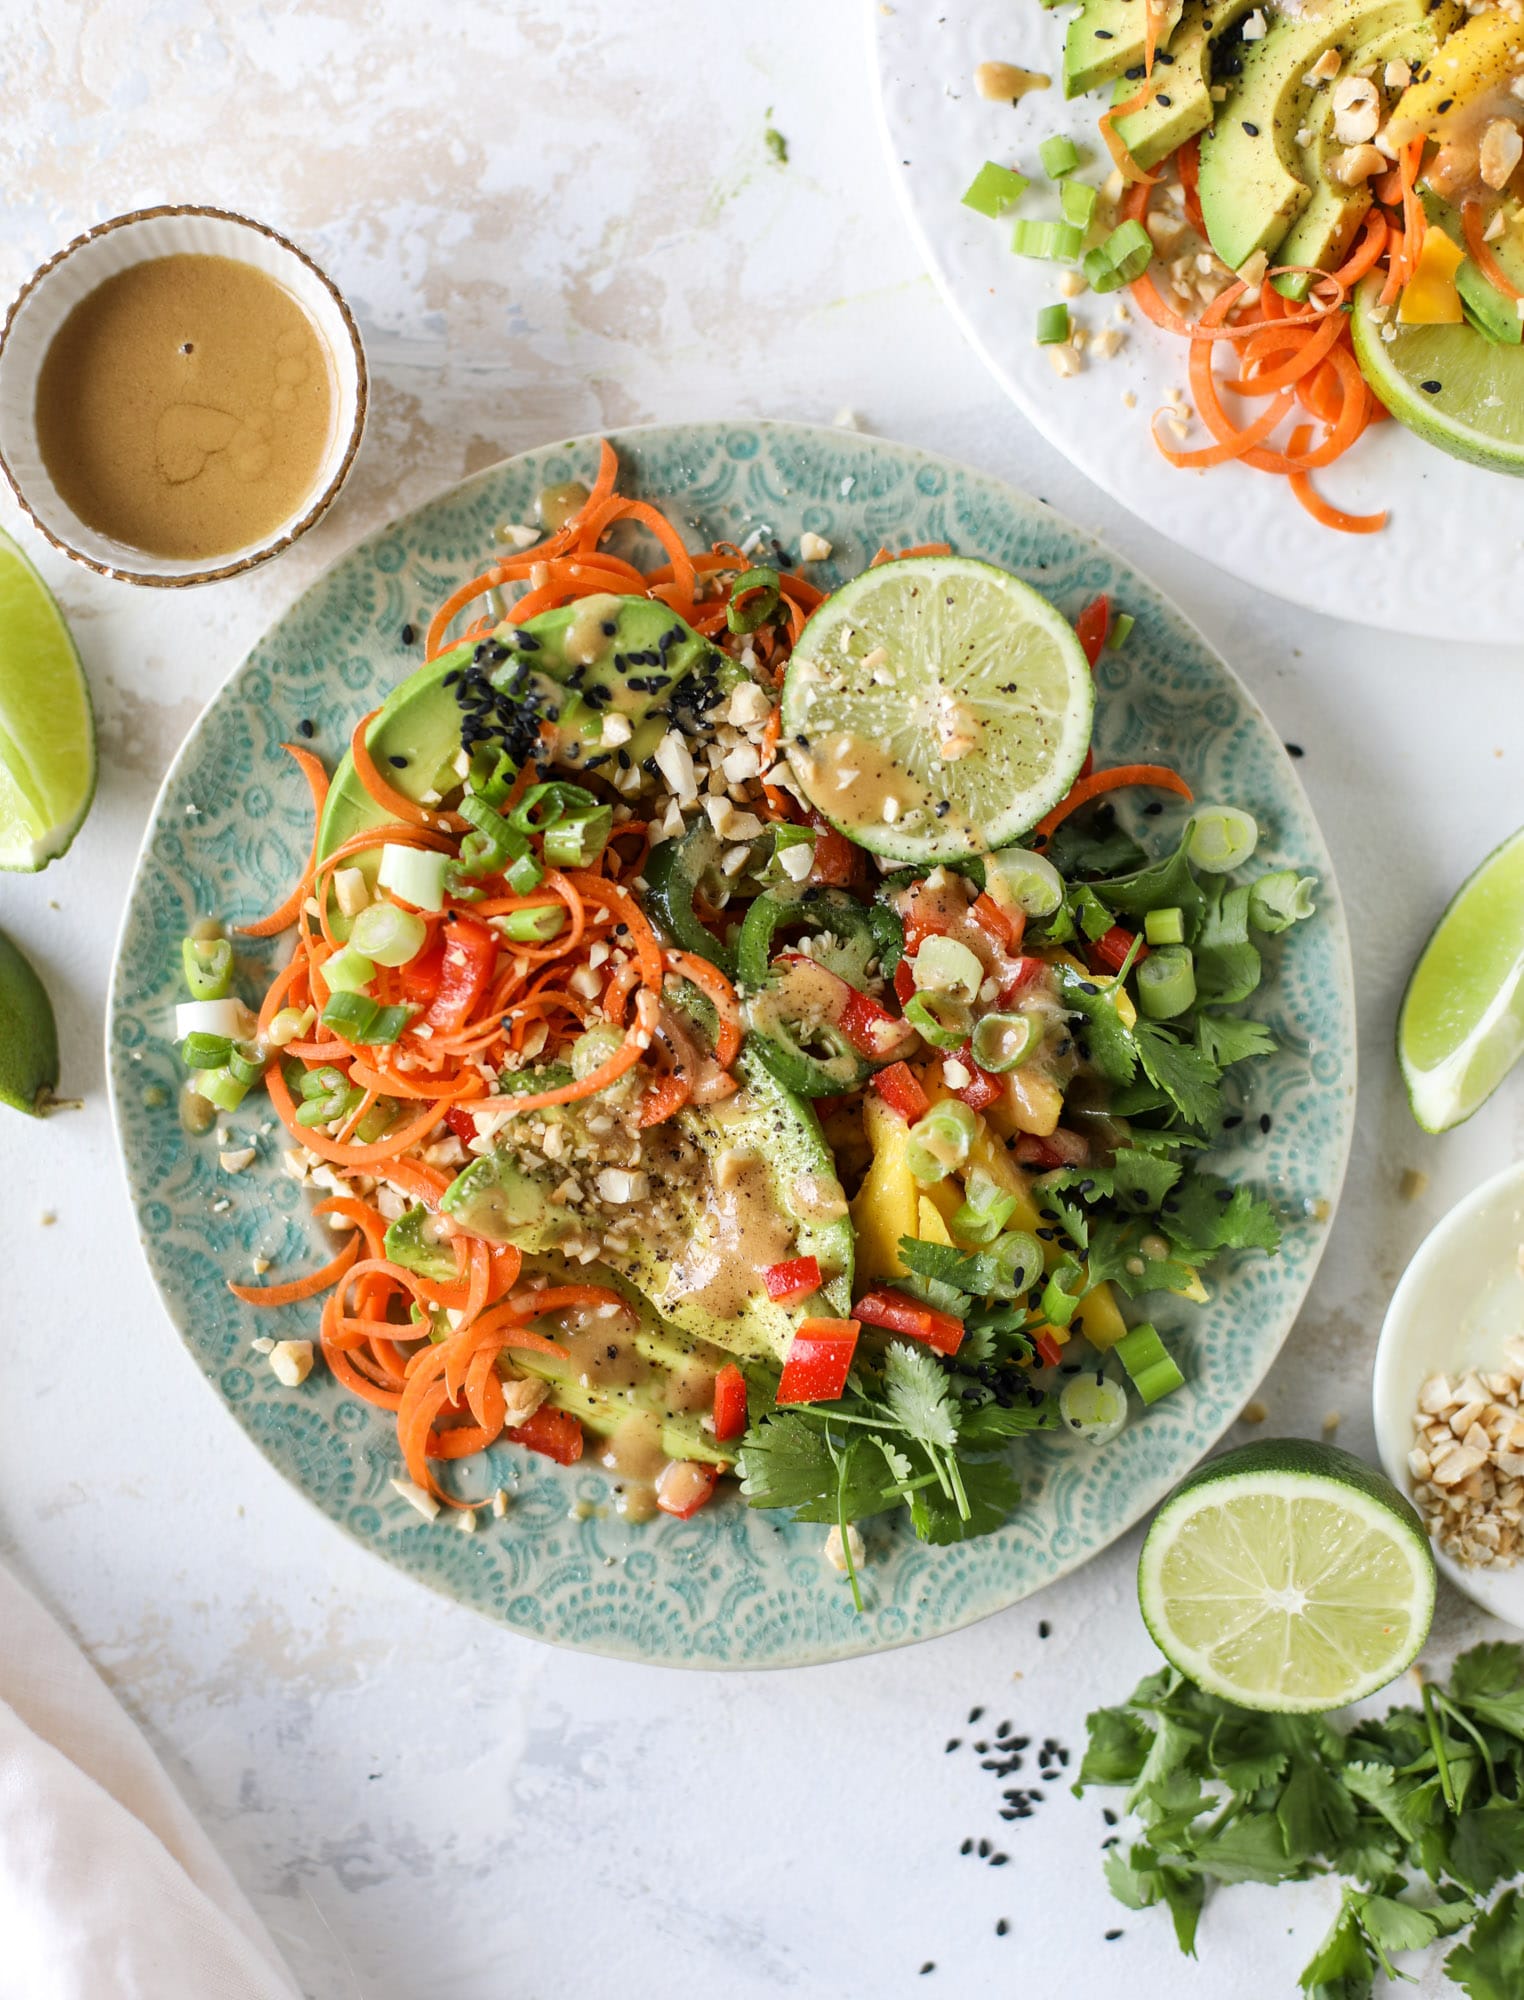 This thai avocado salad is loaded with mango, red pepper, carrots, green onions and drizzled with a peanut butter vinaigrette. It's an amazing side salad or a fabulous dinner salad - add on chickpeas or shrimp or chicken if you wish! I howsweeteats.com #thai #avocado #salad #peanutbutter #mango #lime